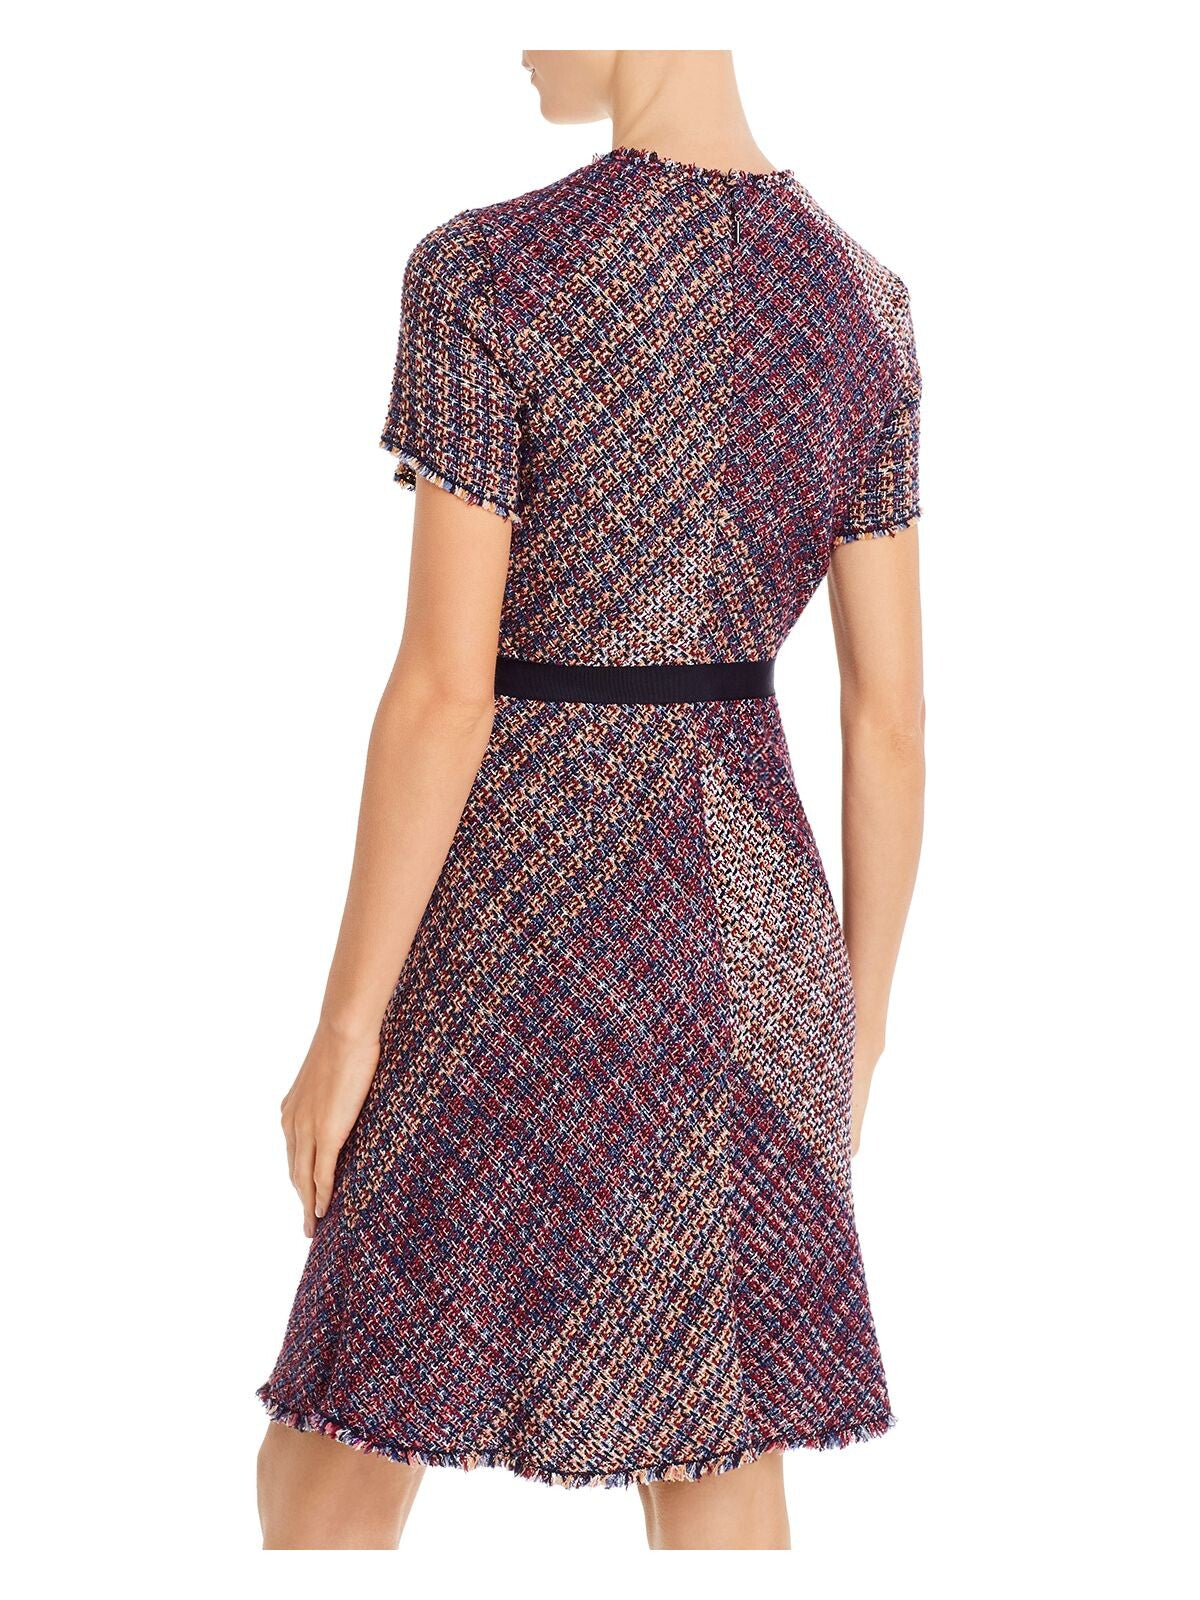 REBECCA TAYLOR Womens Purple Belted Speckle Short Sleeve Jewel Neck Above The Knee Cocktail Sheath Dress 4